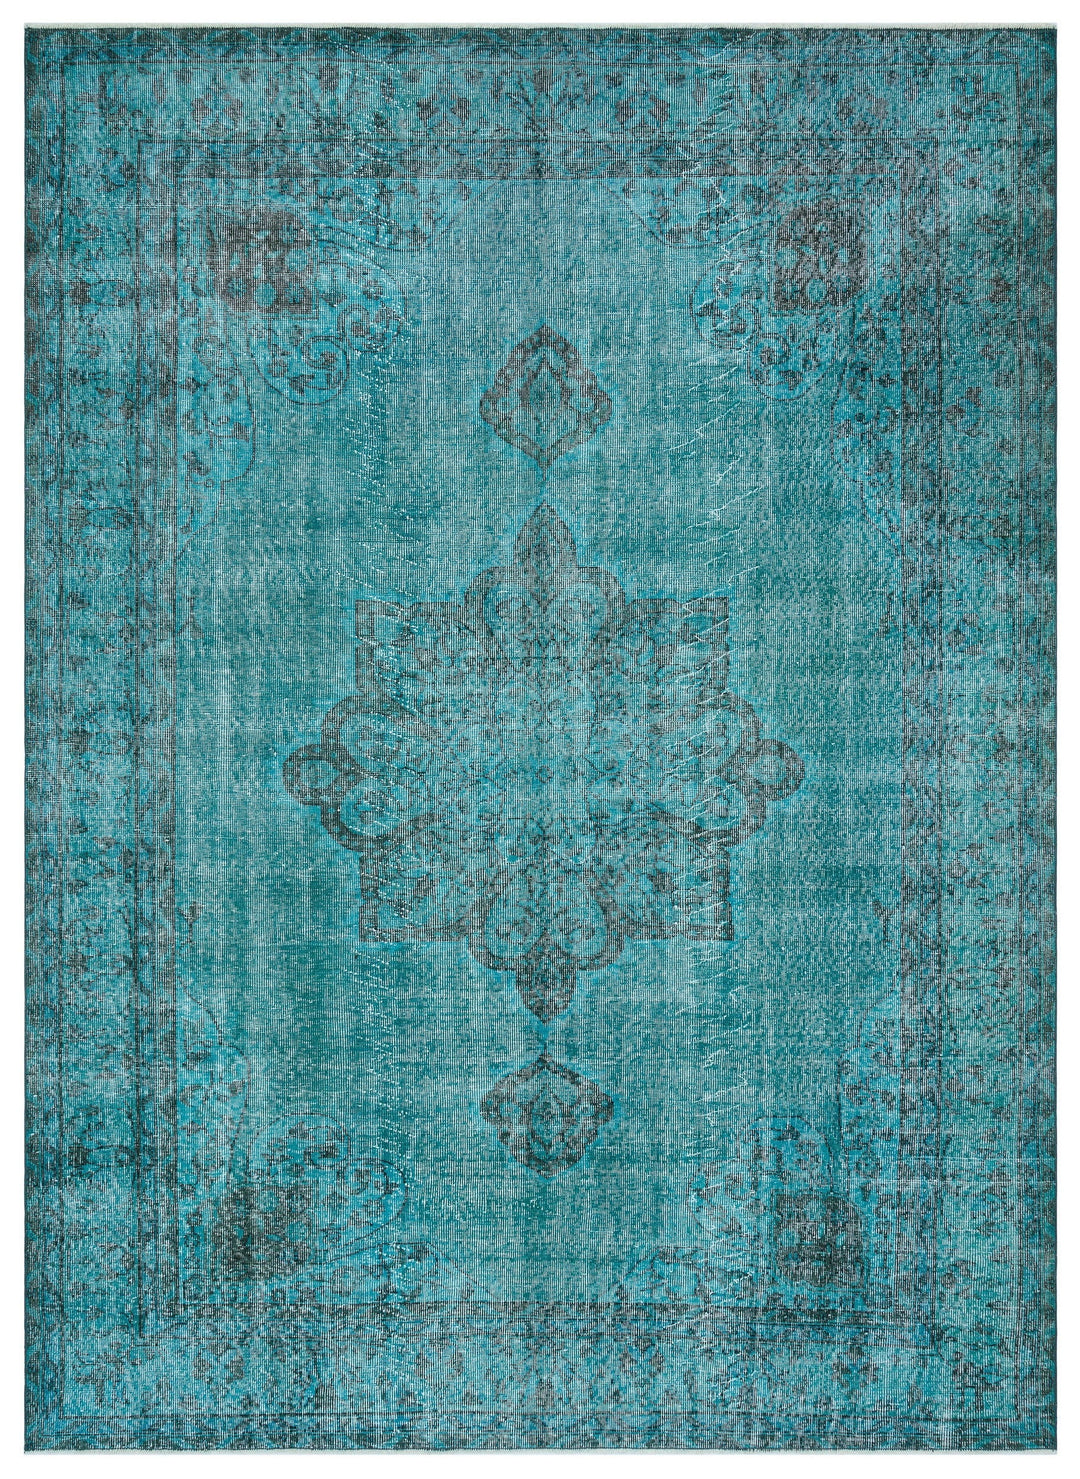 Athens Turquoise Tumbled Wool Hand Woven Carpet 221 x 307